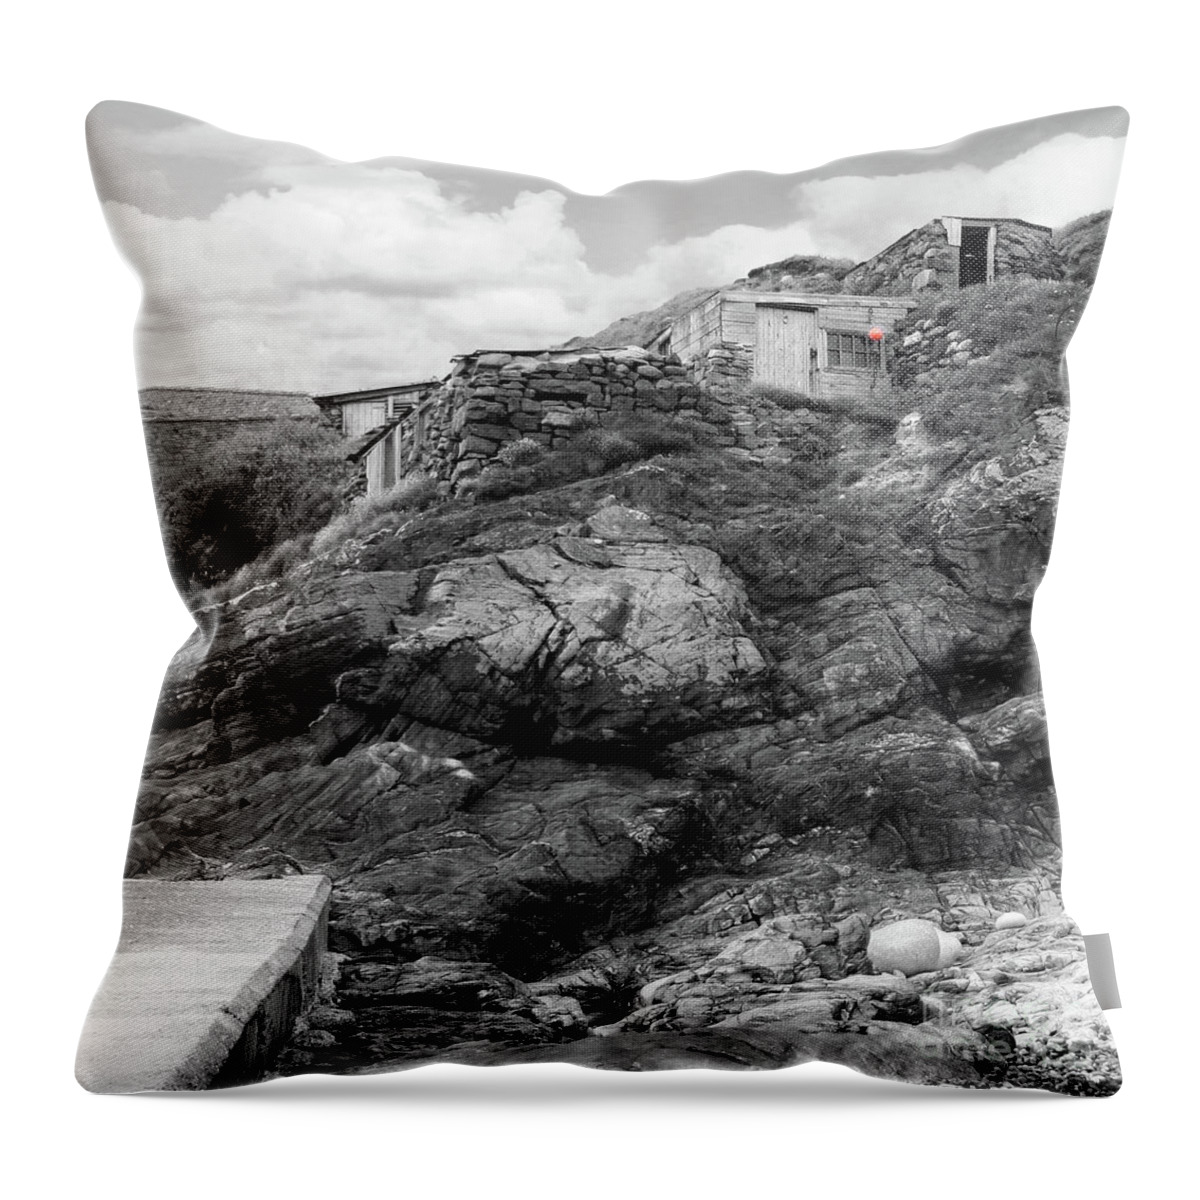 Huts Throw Pillow featuring the photograph Fishing Huts Cape Cornwall by Terri Waters